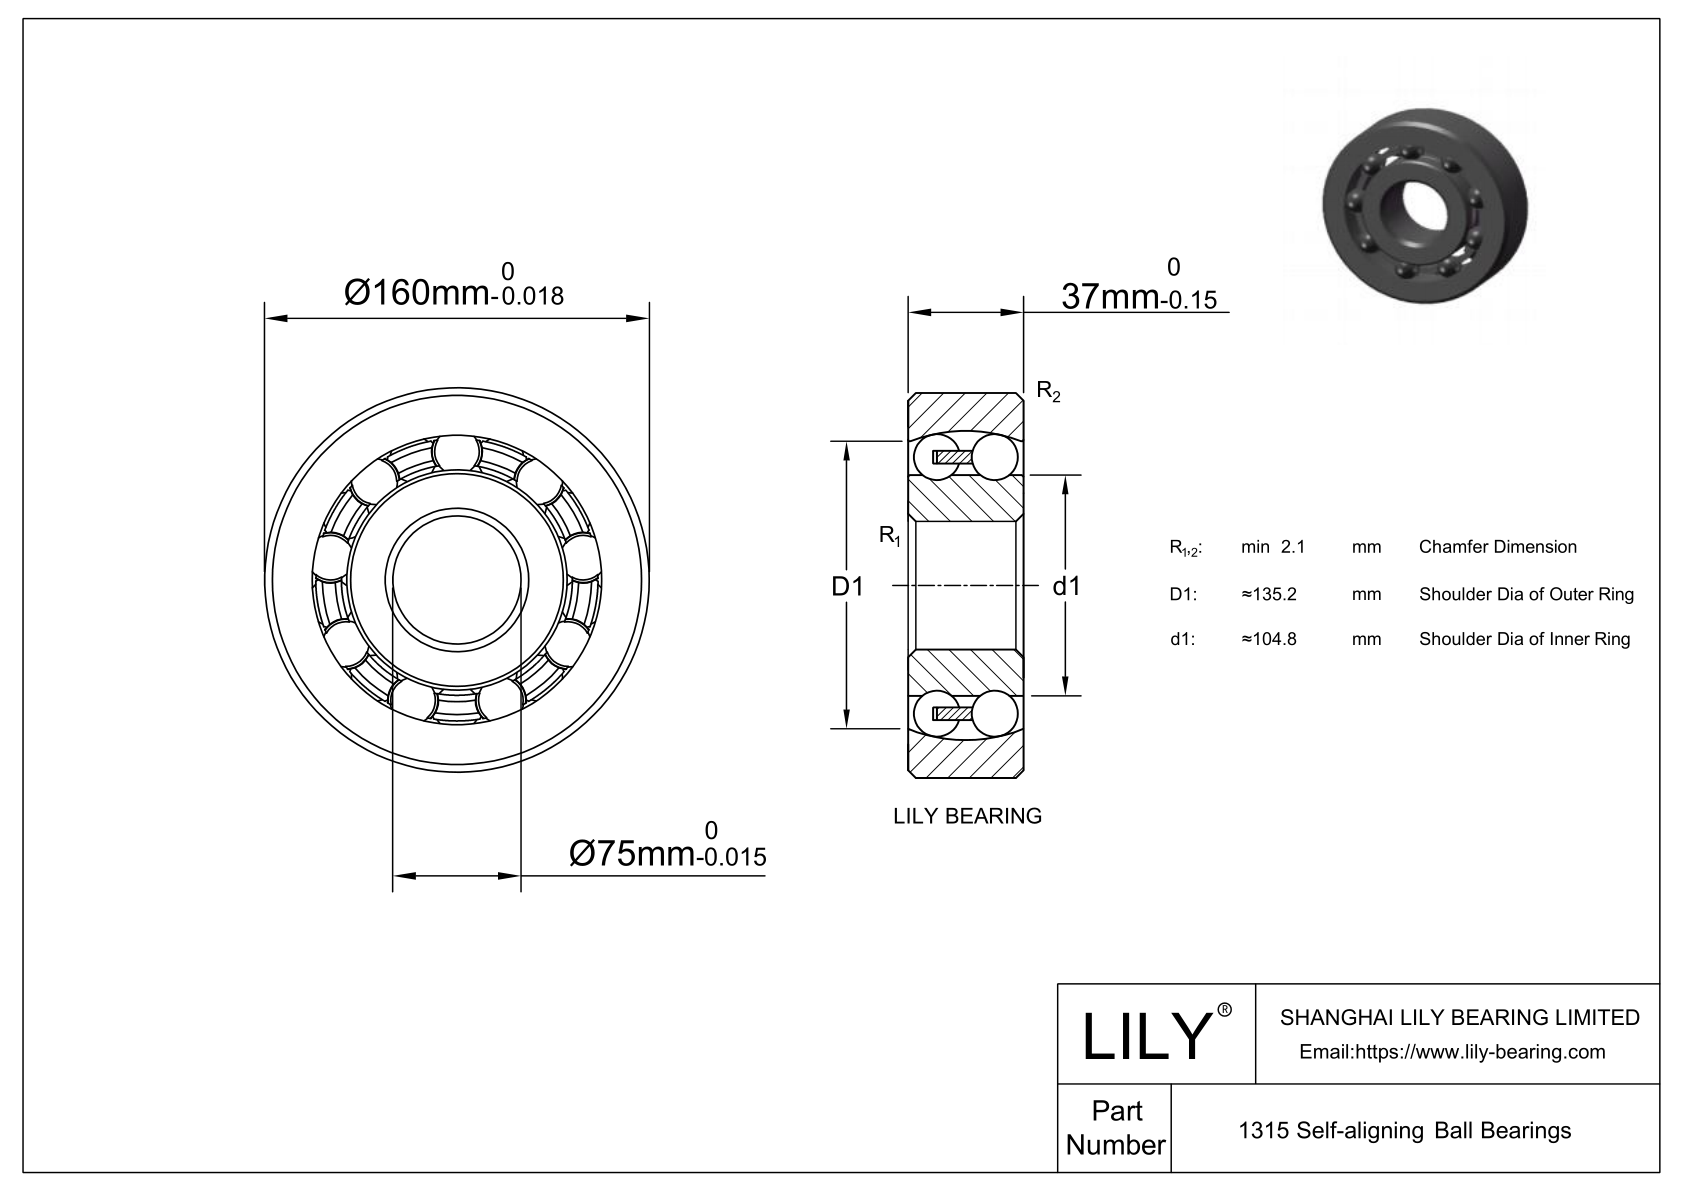 S1315 Stainless Steel Self Aligning Ball Bearings cad drawing